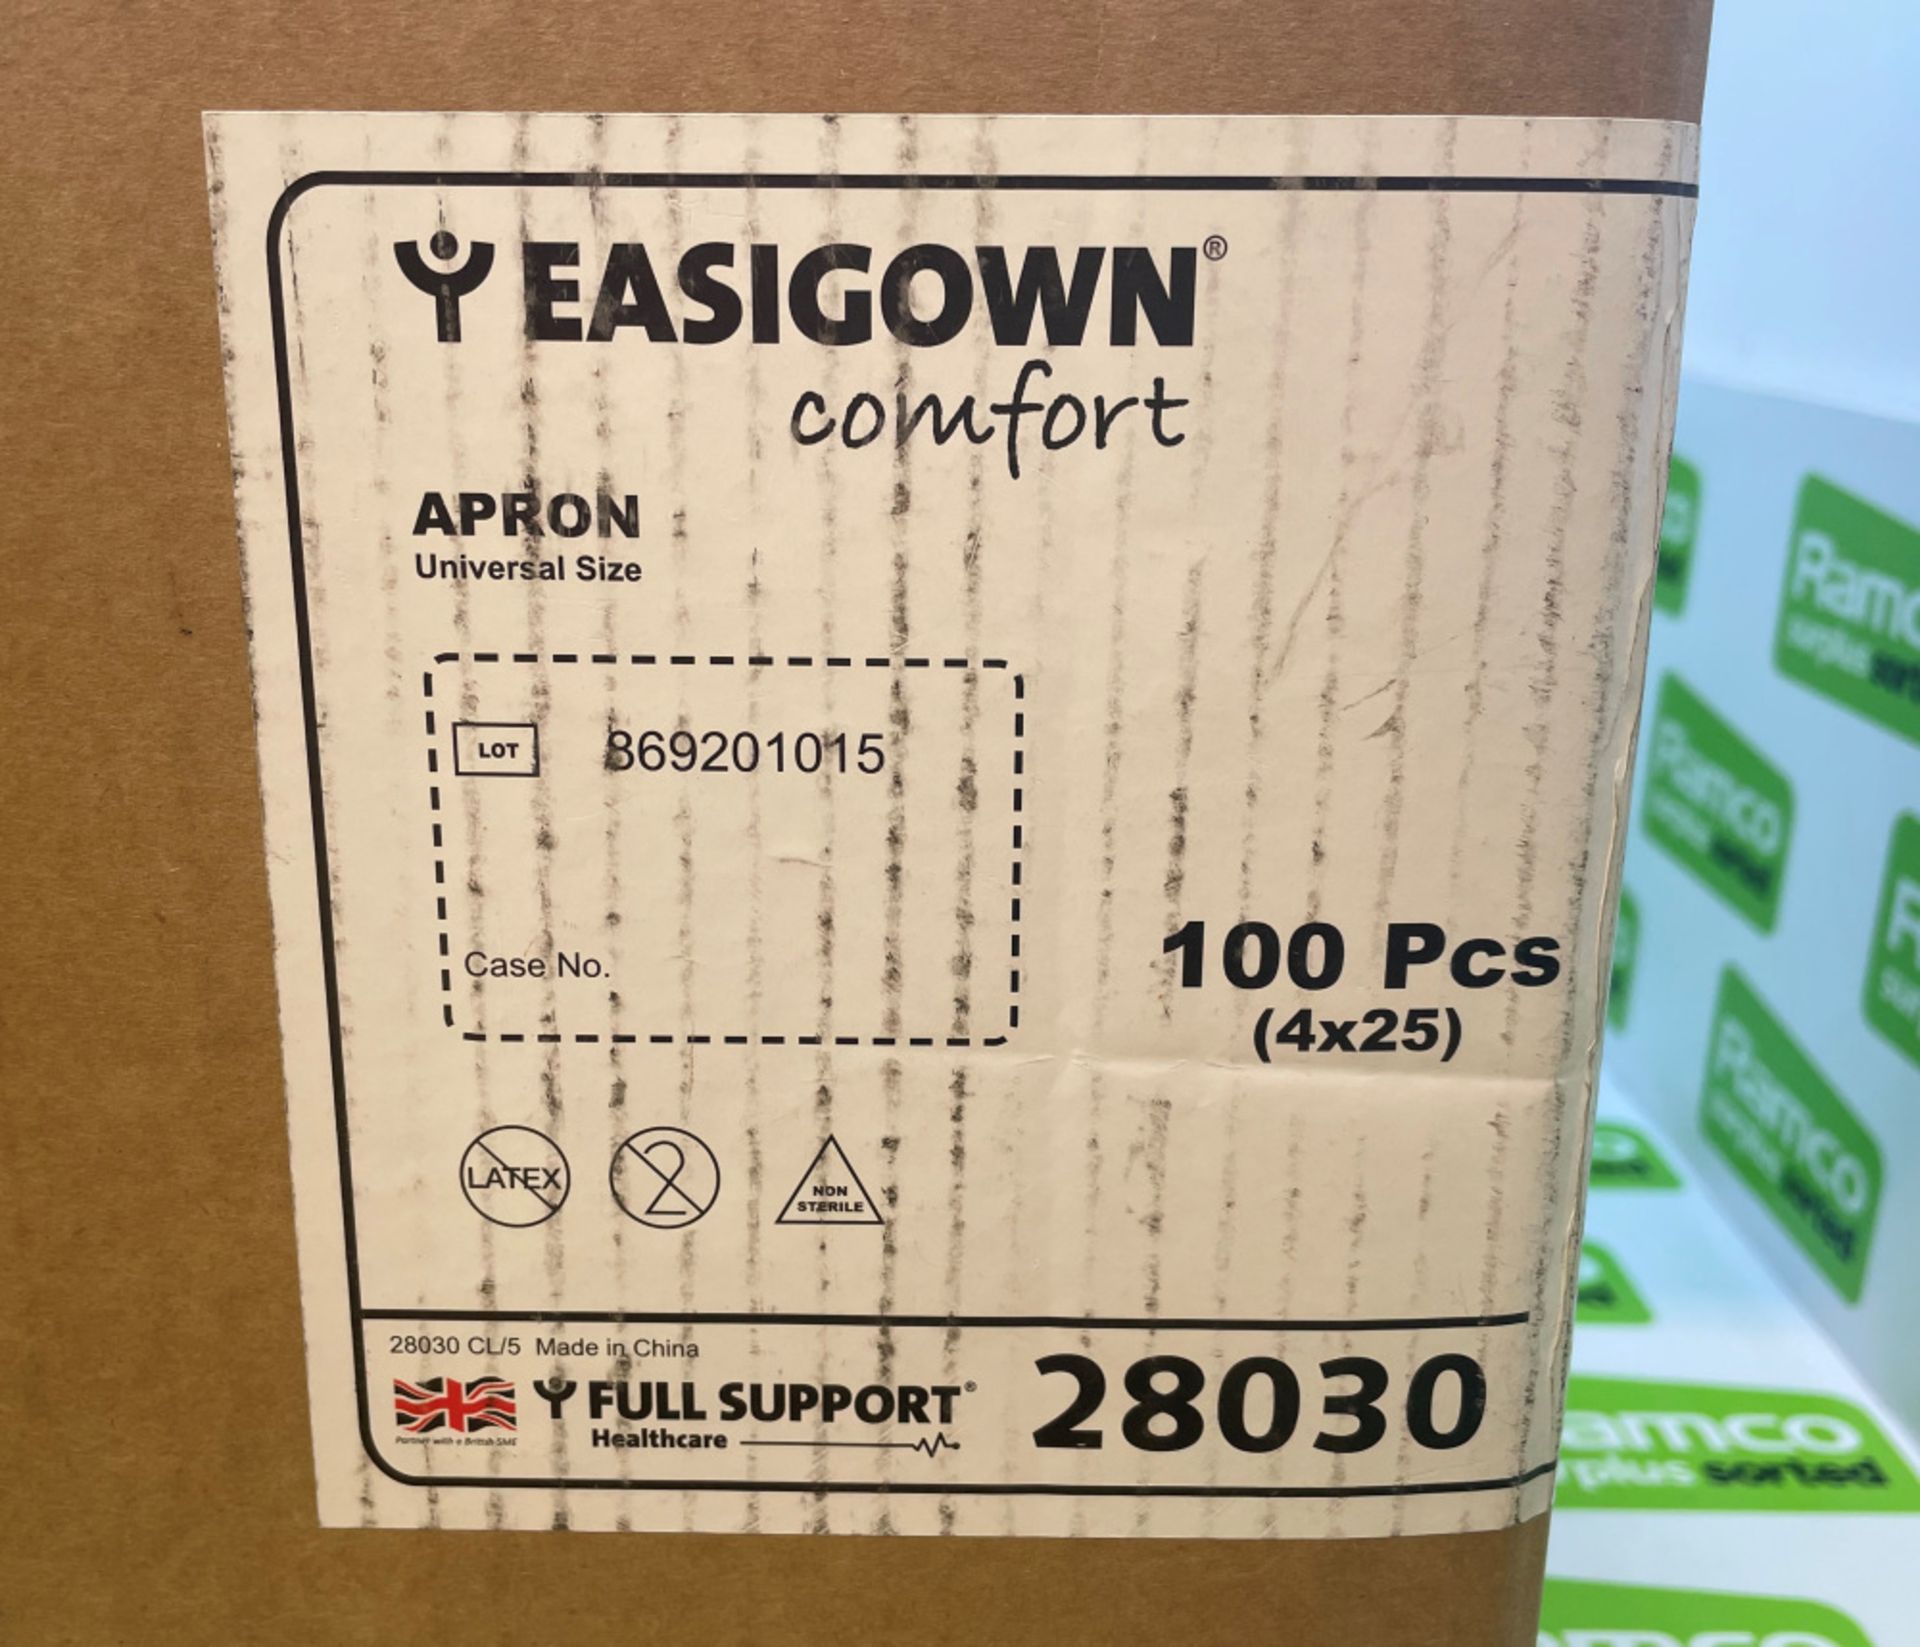 240x pallets of Easigown aprons - est. total qty 1440000 - location OX14 4TF - Image 7 of 10